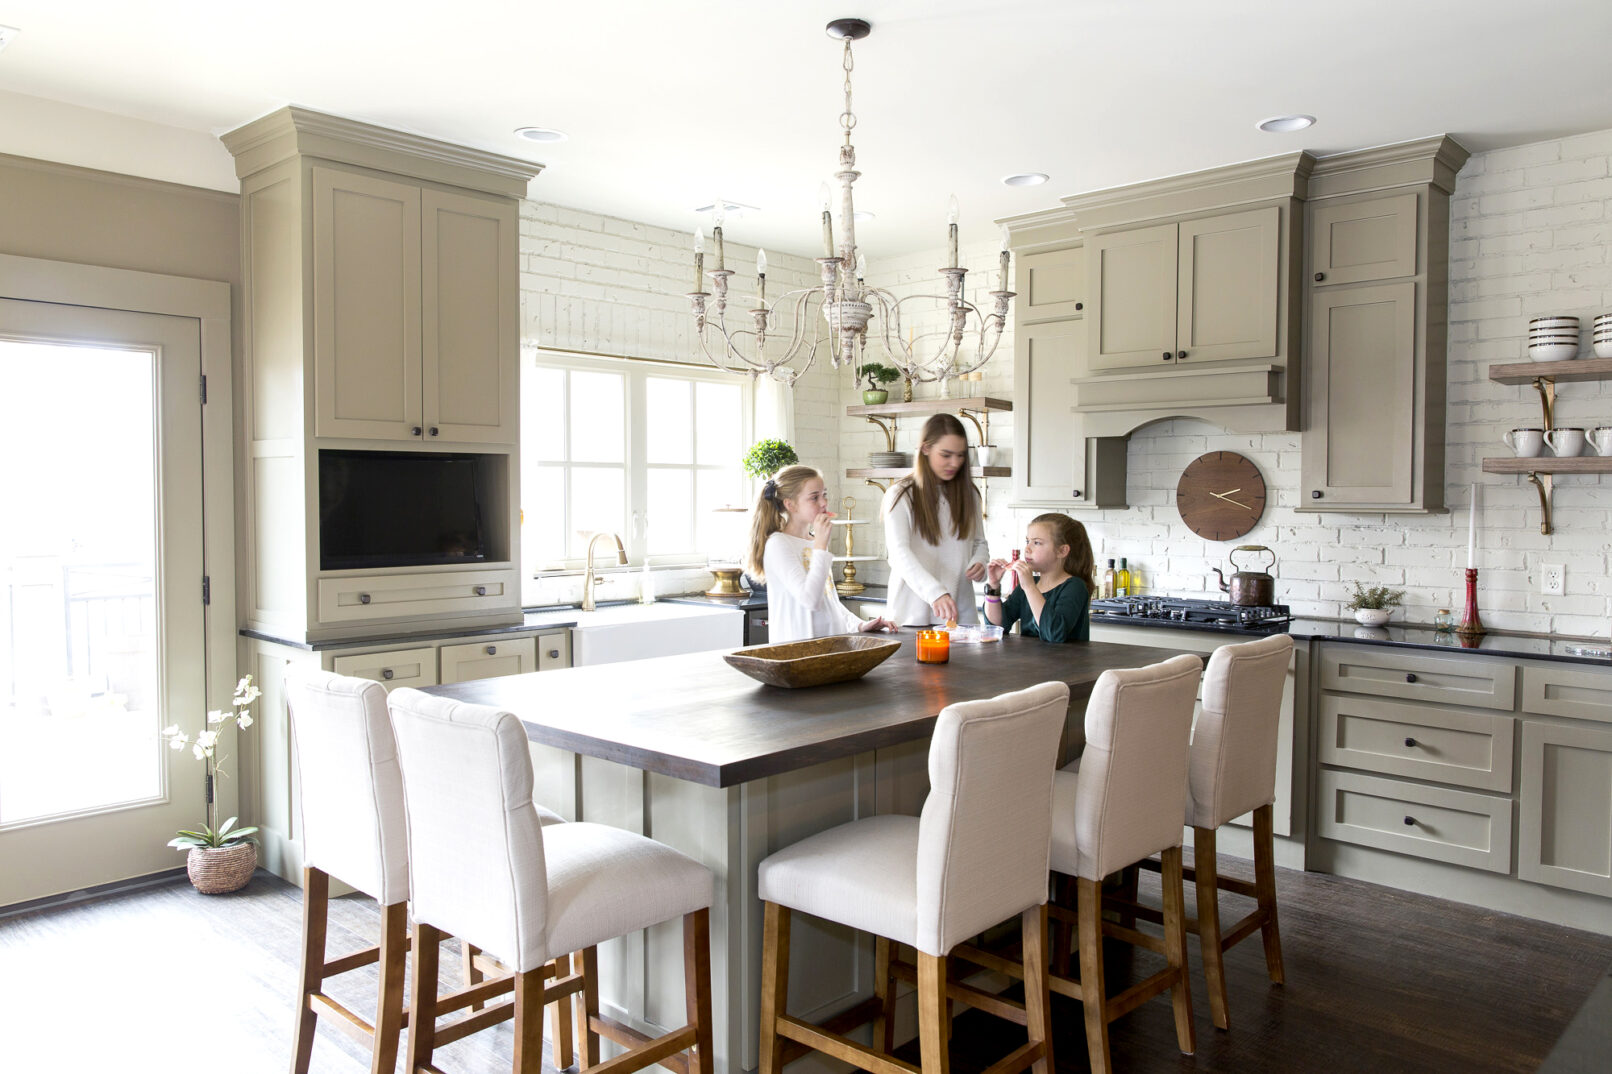 Children stand around a large kitchen island and snack during a photo shoot.